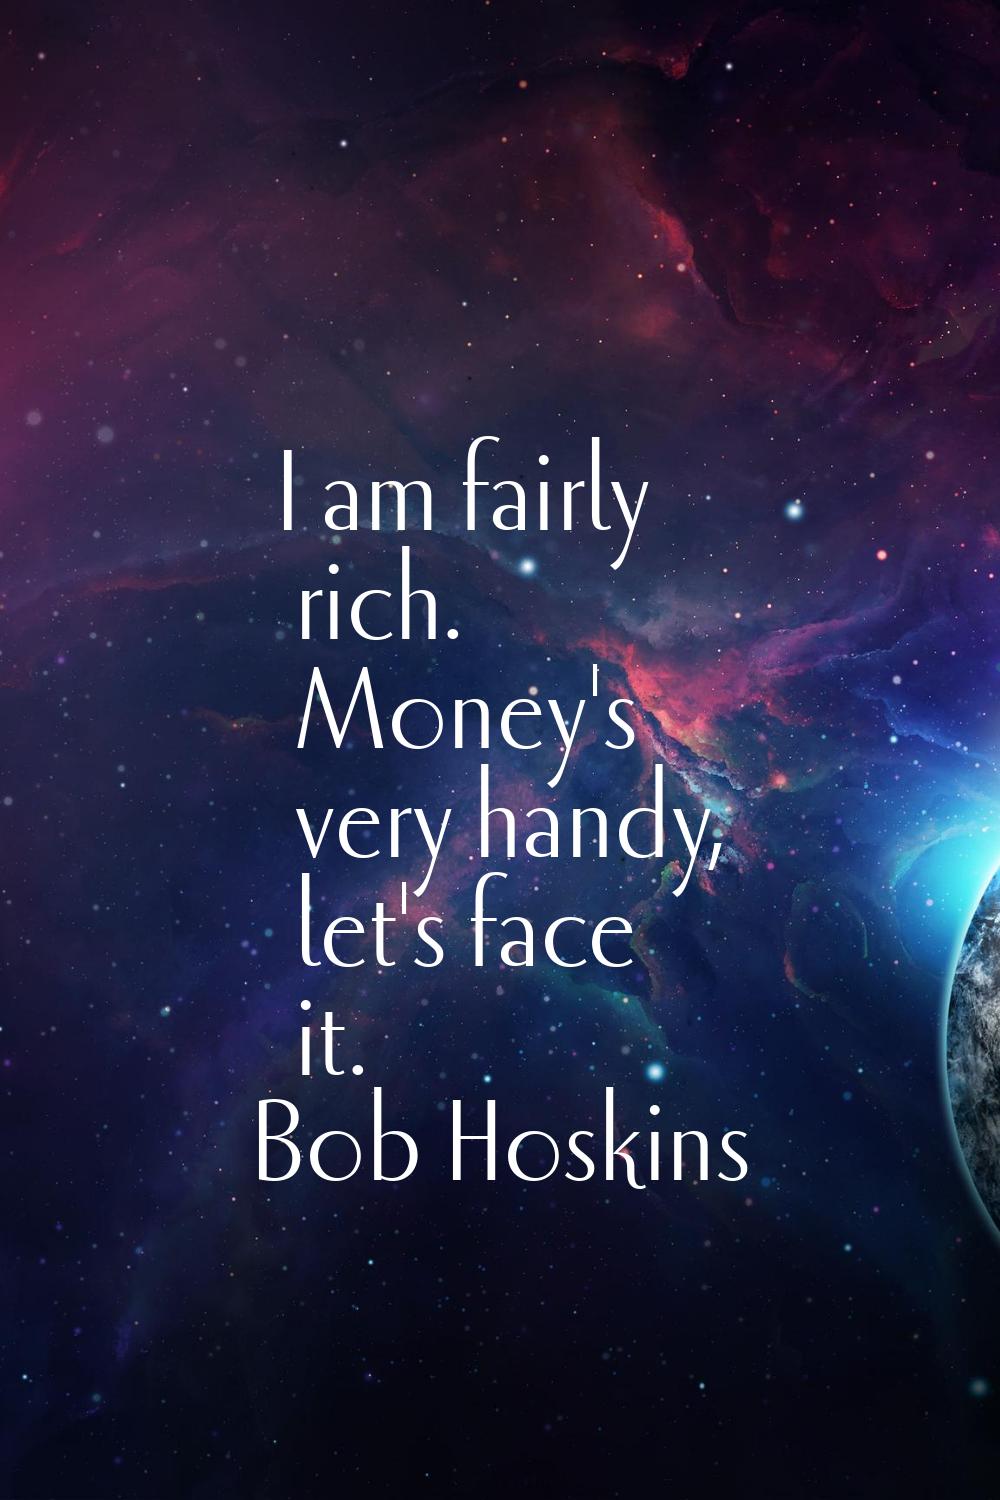 I am fairly rich. Money's very handy, let's face it.